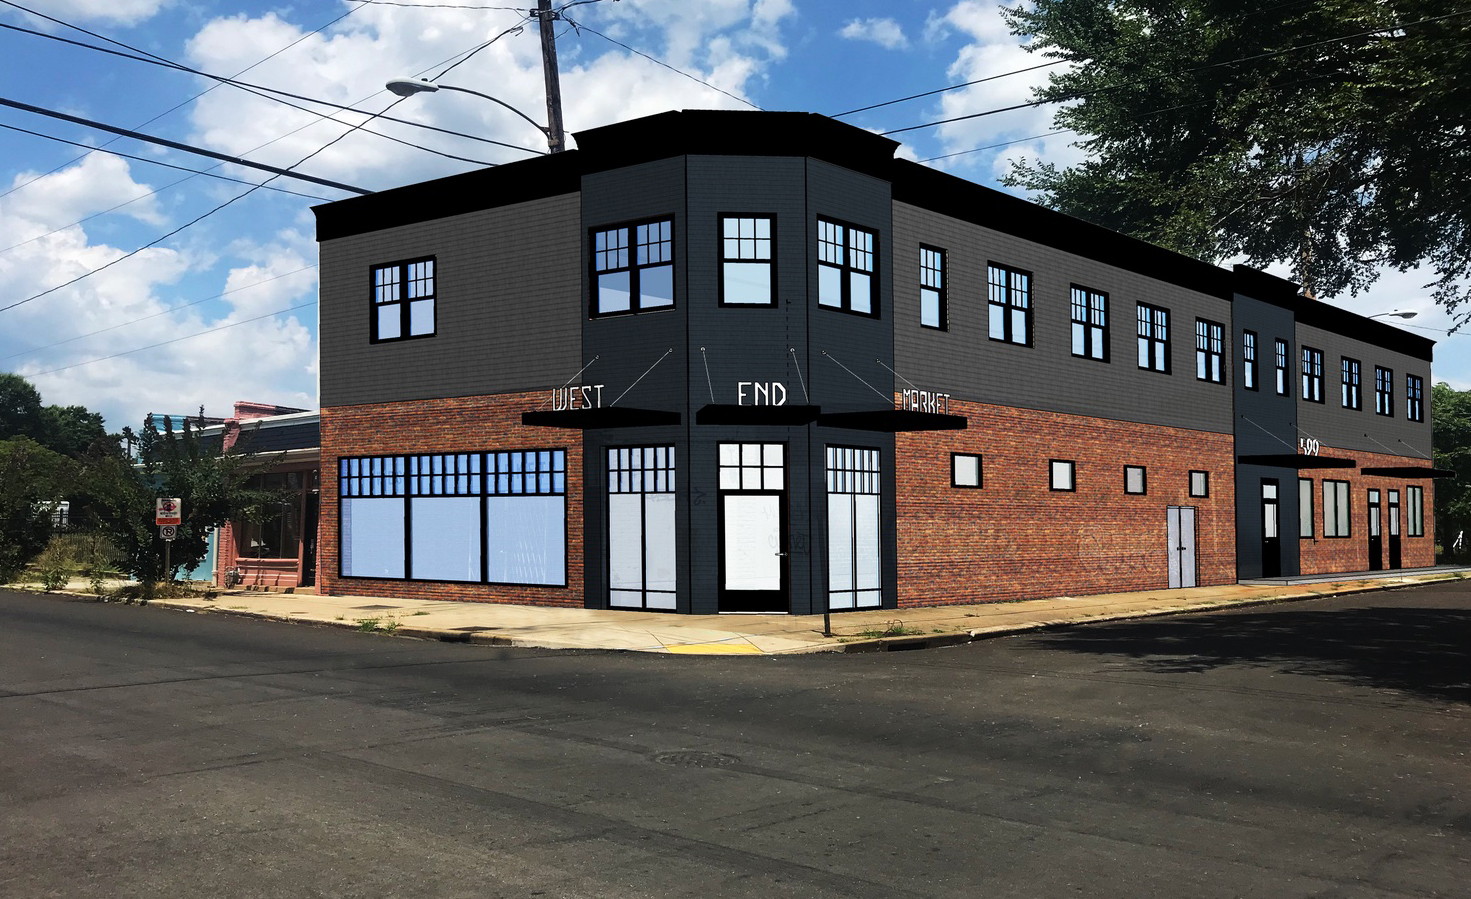 Apartments being added to former West End Market building in Byrd Park